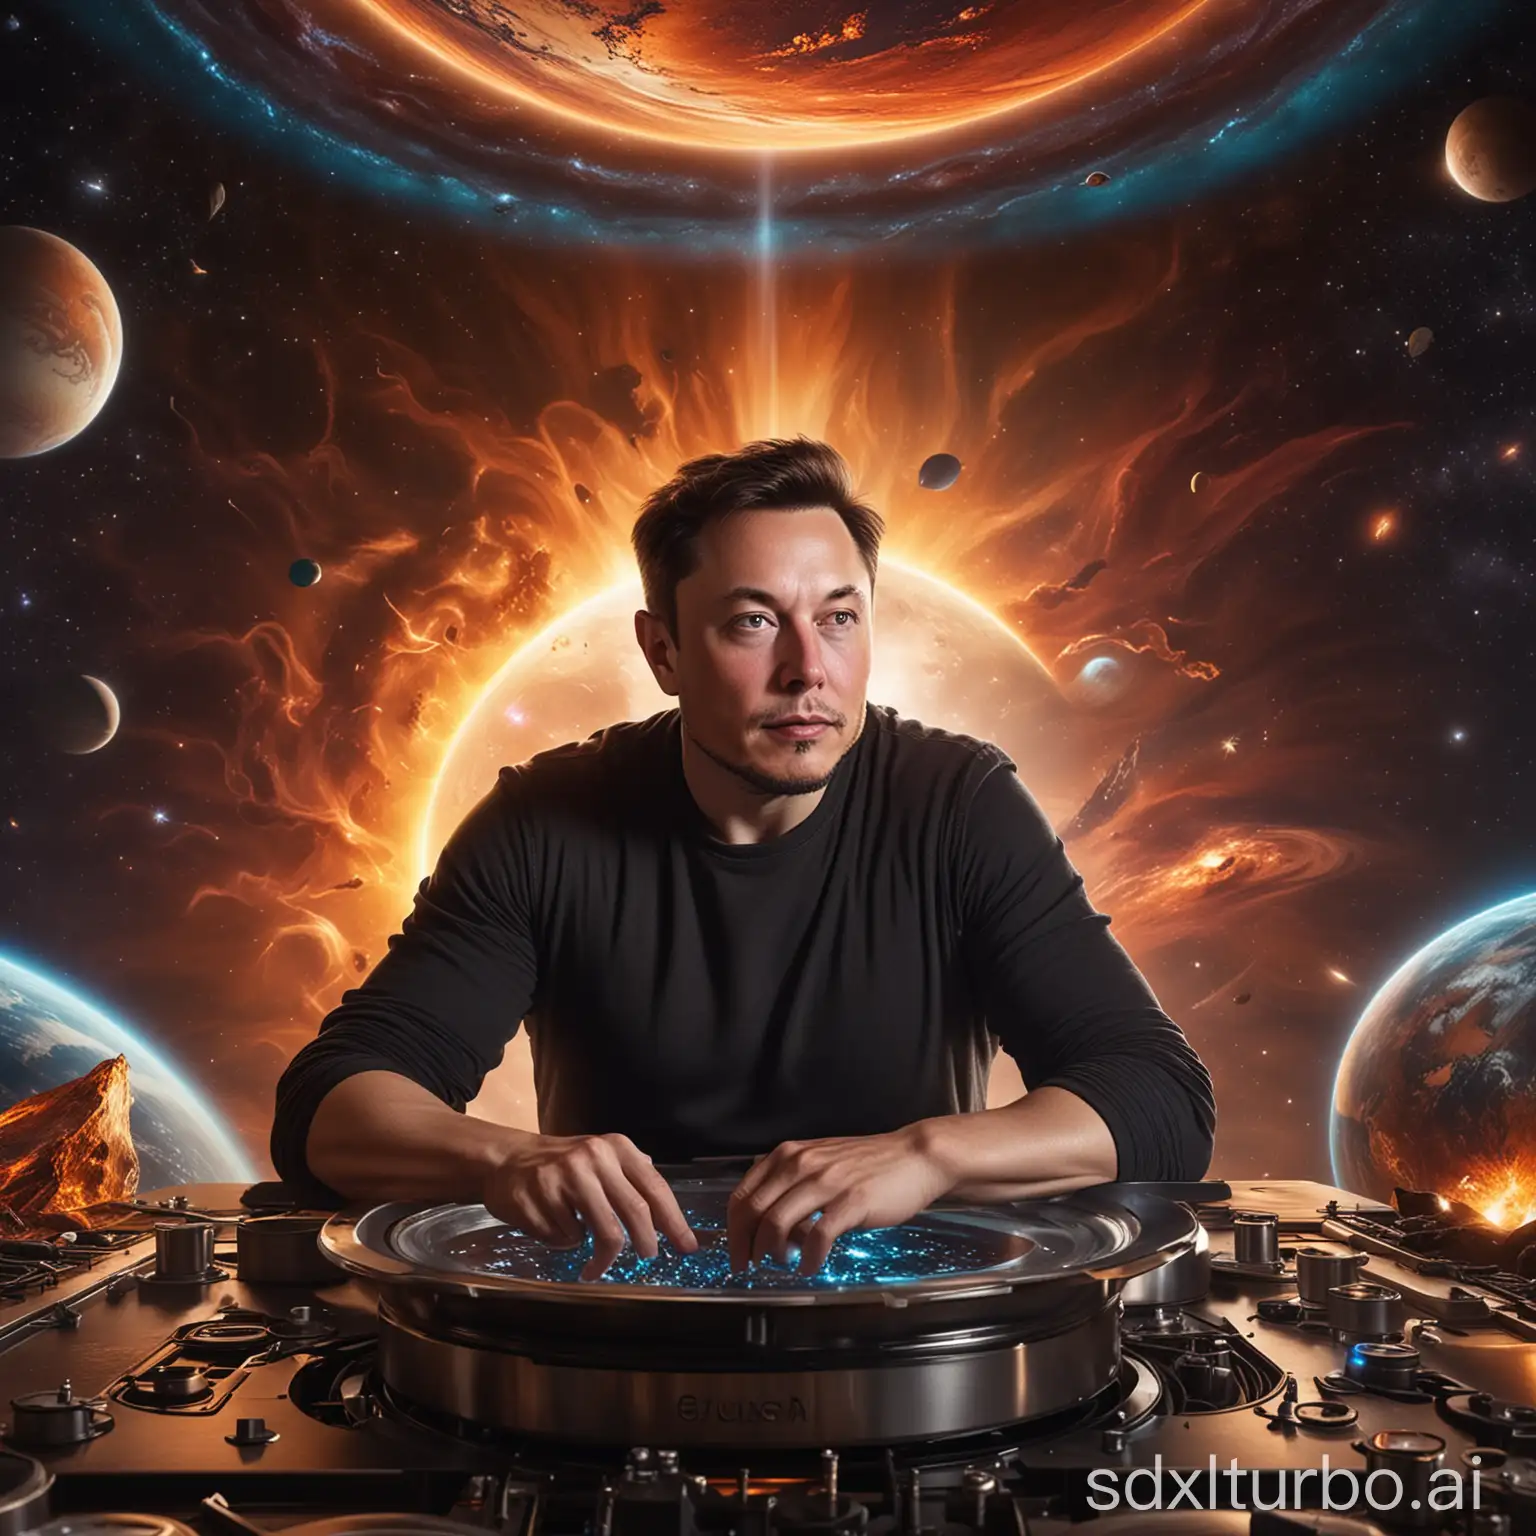 Zoom in on Elon Musk's face as he leans over a cosmic stove, his expression a mix of concentration and anticipation. Musk's eyes shine with a sense of wonder as he experiments with otherworldly ingredients, his face bathed in the warm glow of a futuristic kitchen. Behind him, a swirling nebula and distant planets serve as a backdrop, symbolizing Musk's quest to unlock the mysteries of the universe through food and innovation. Rendered in breathtaking 4K and 8K resolution, this hyperrealistic portrait captures Musk's visionary spirit and his relentless pursuit of a brighter tomorrow.